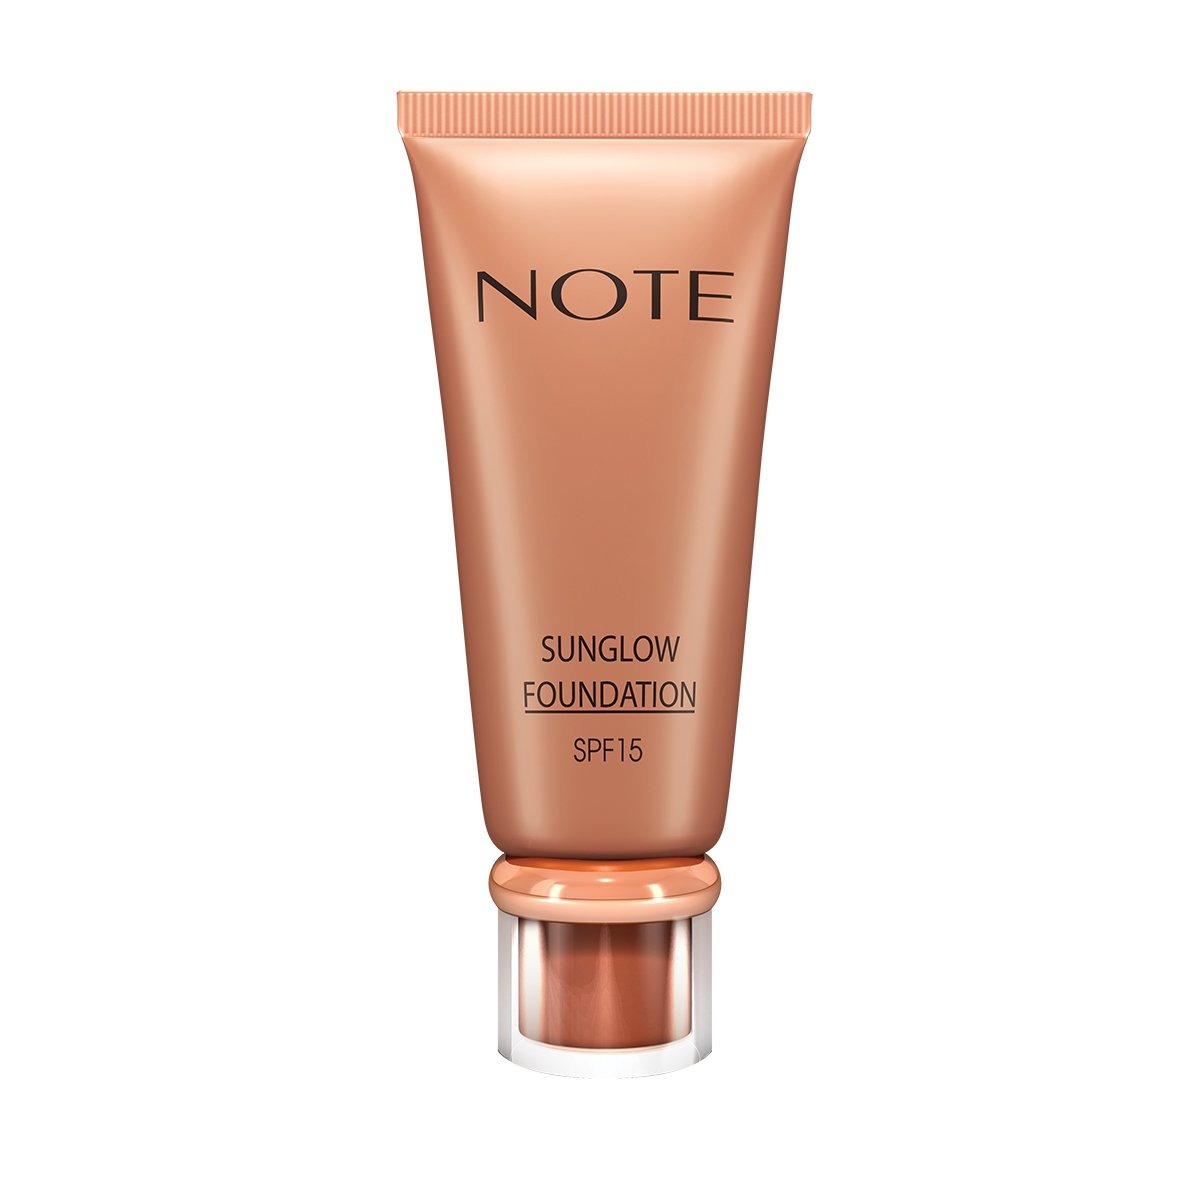 NOTE SUN GLOW FOUNDATION, Halal Foundation, Vegan Foundation, Paraben Free Foundation, Cruelty Free Foundation SPF 15, Vitamin E, Foundation, Natural Glow, All Skin Types, Liquid Higlighter, tan, Silky, Dewy, Sunkissed